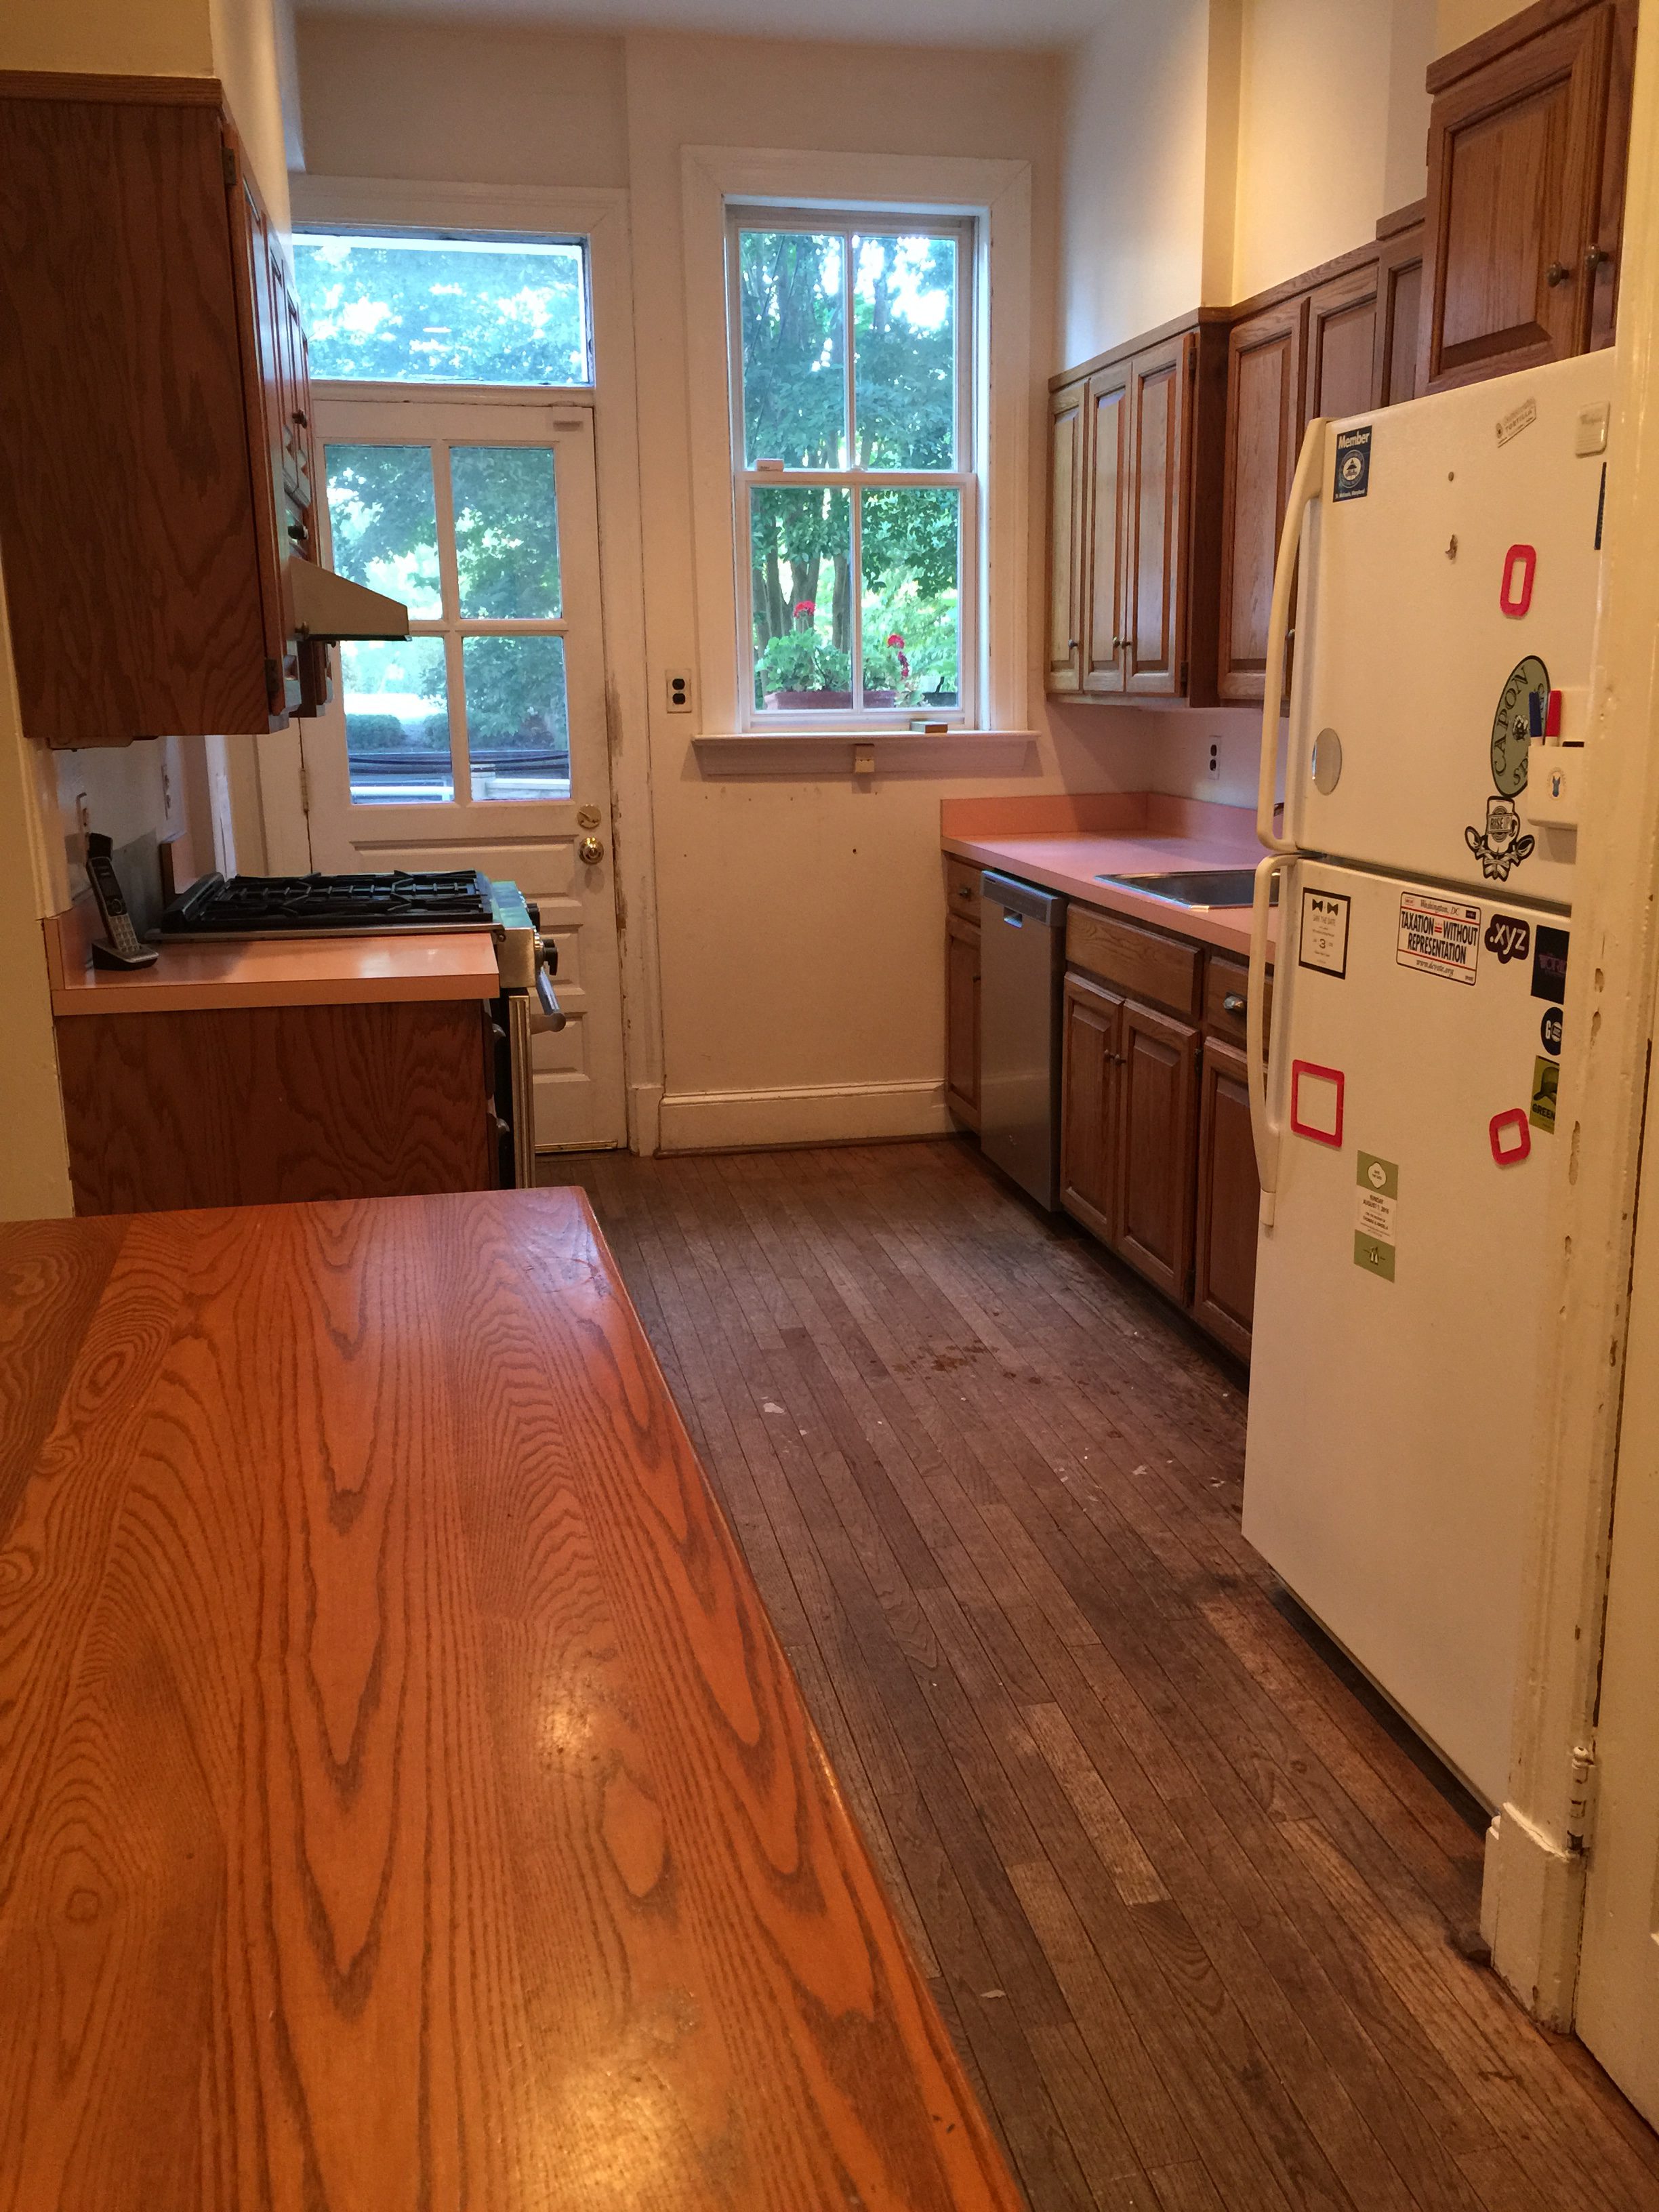 Galley kitchen with pink counters before renovation